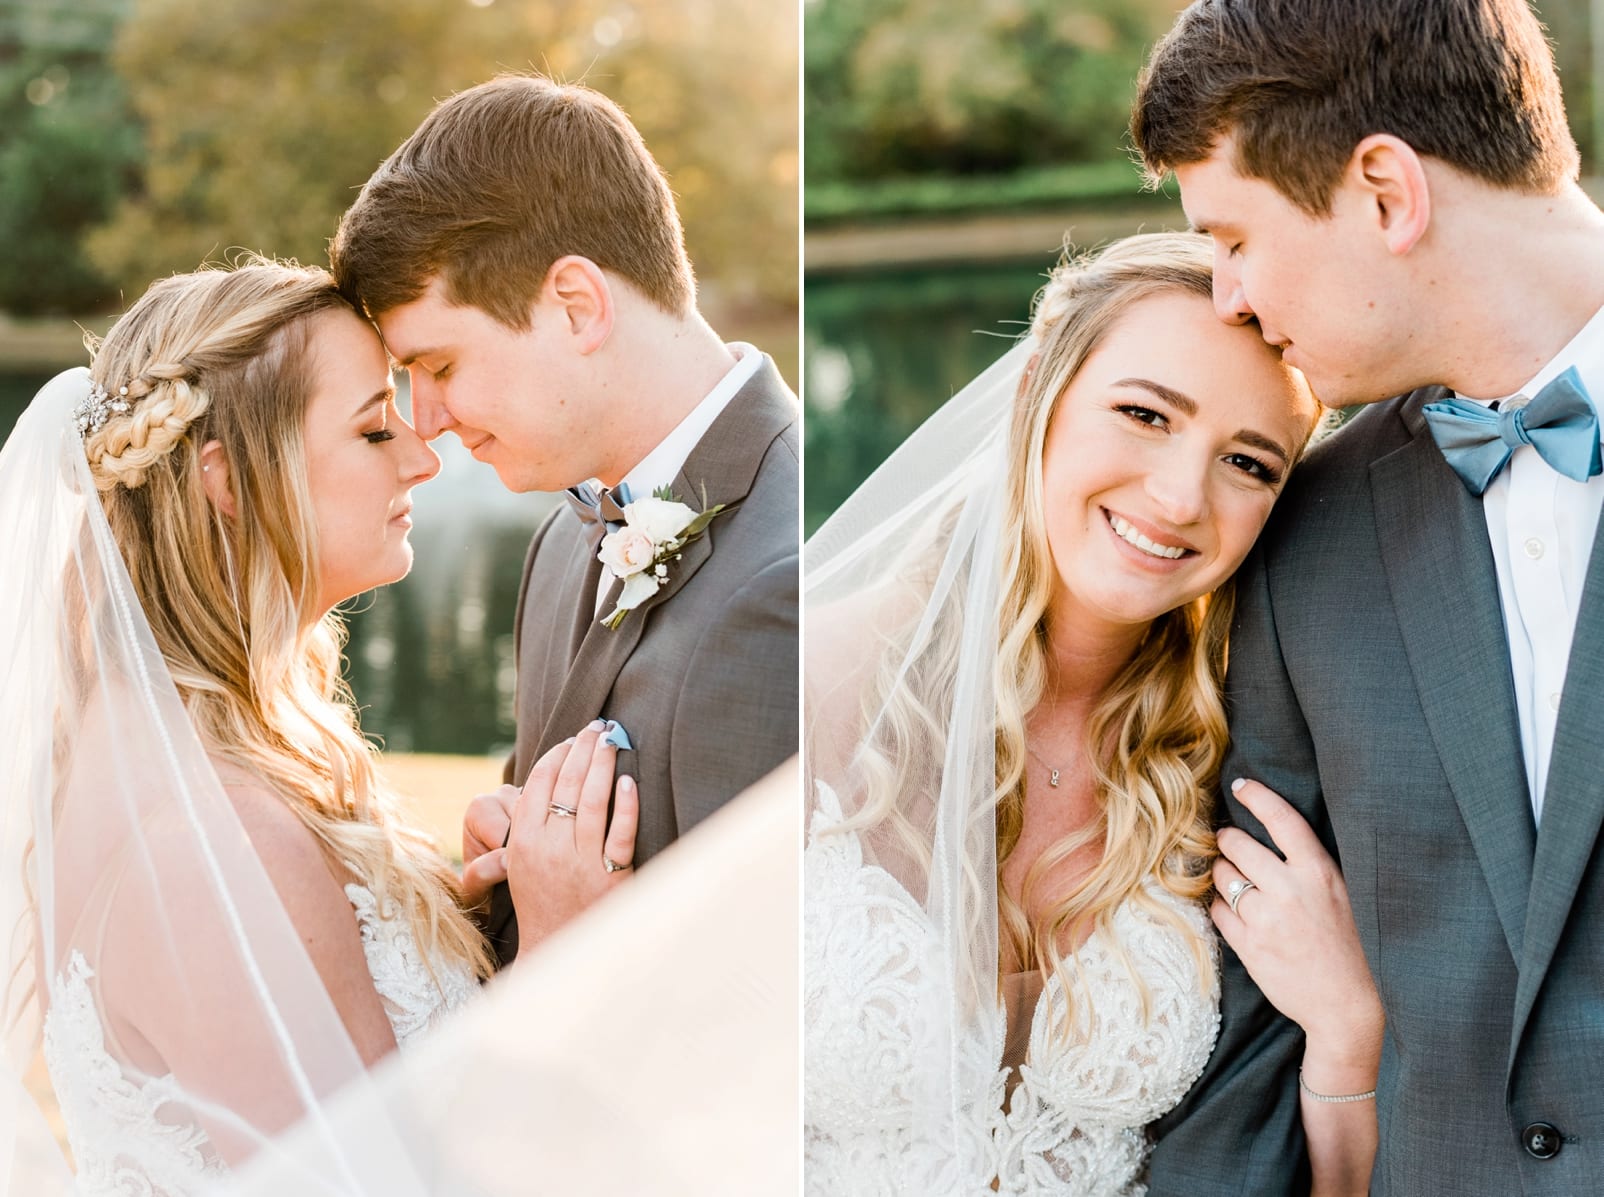 Raleigh bride and groom standing together, touching foreheads and the groom kissing his bride on her head photo